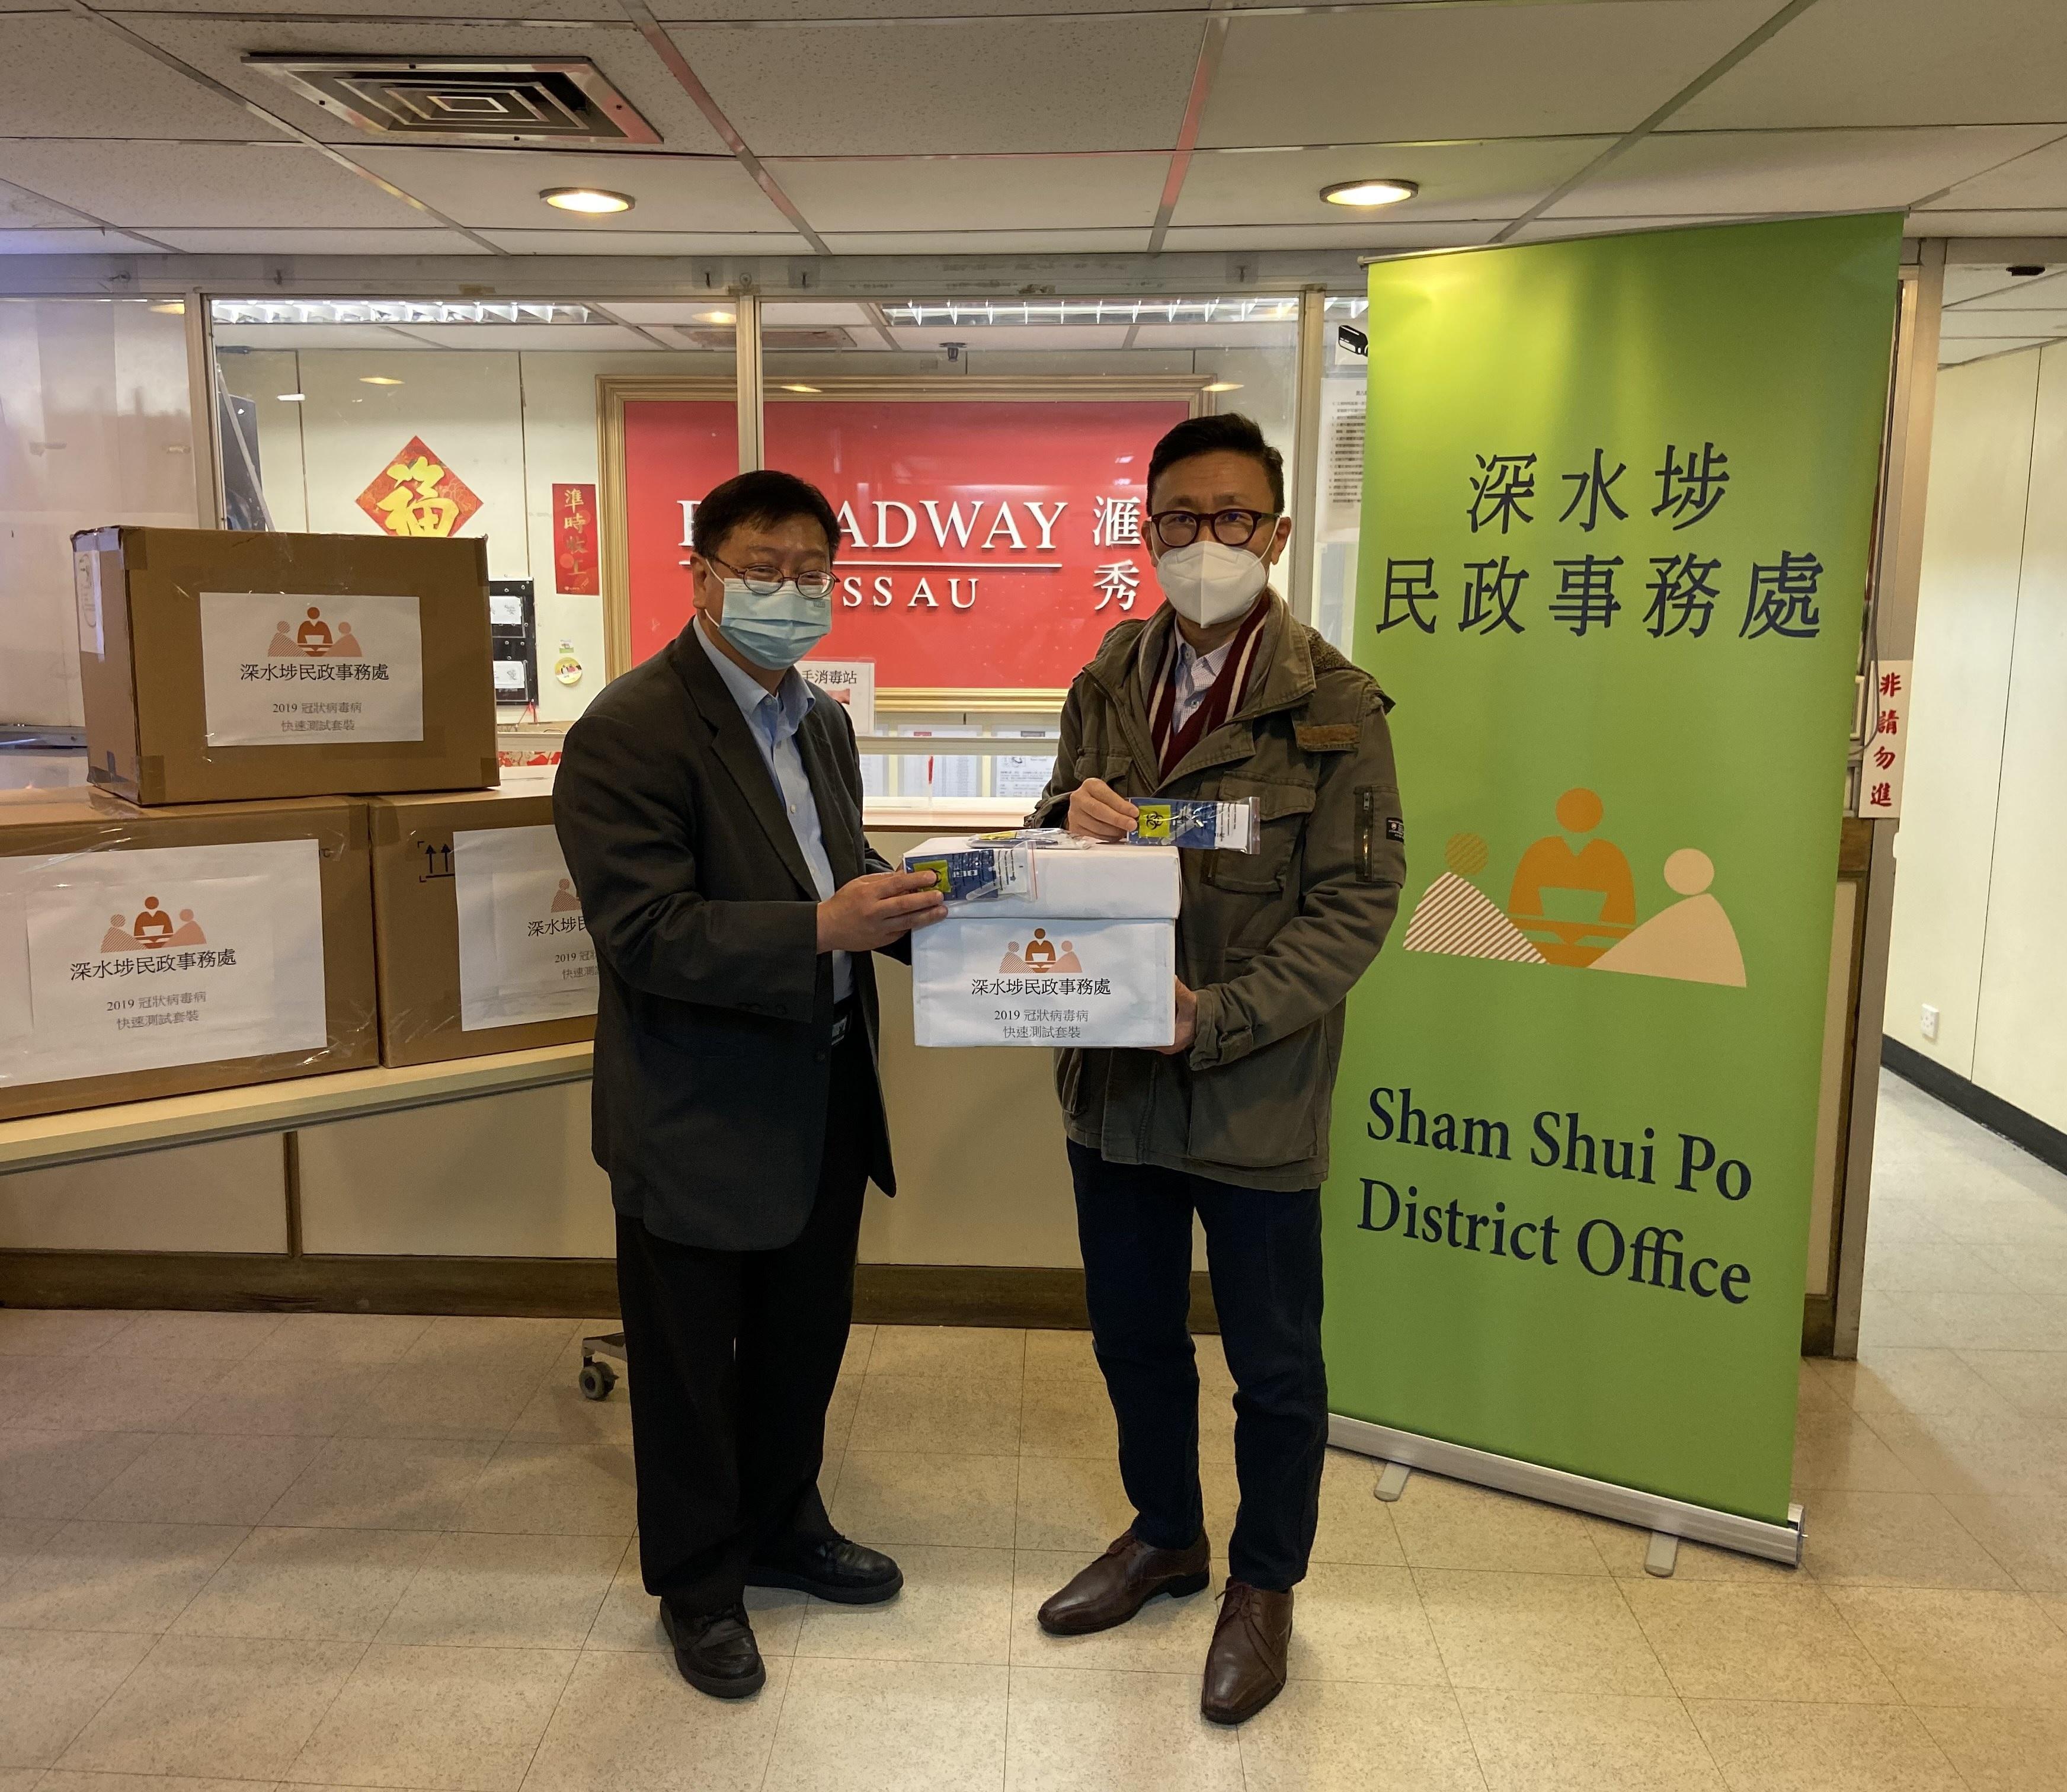 The Sham Shui Po District Office today (February 18) distributed COVID-19 rapid test kits to cleansing workers and property management staff working in Mei Foo Sun Chuen for voluntary testing through the property management company of the estate.

